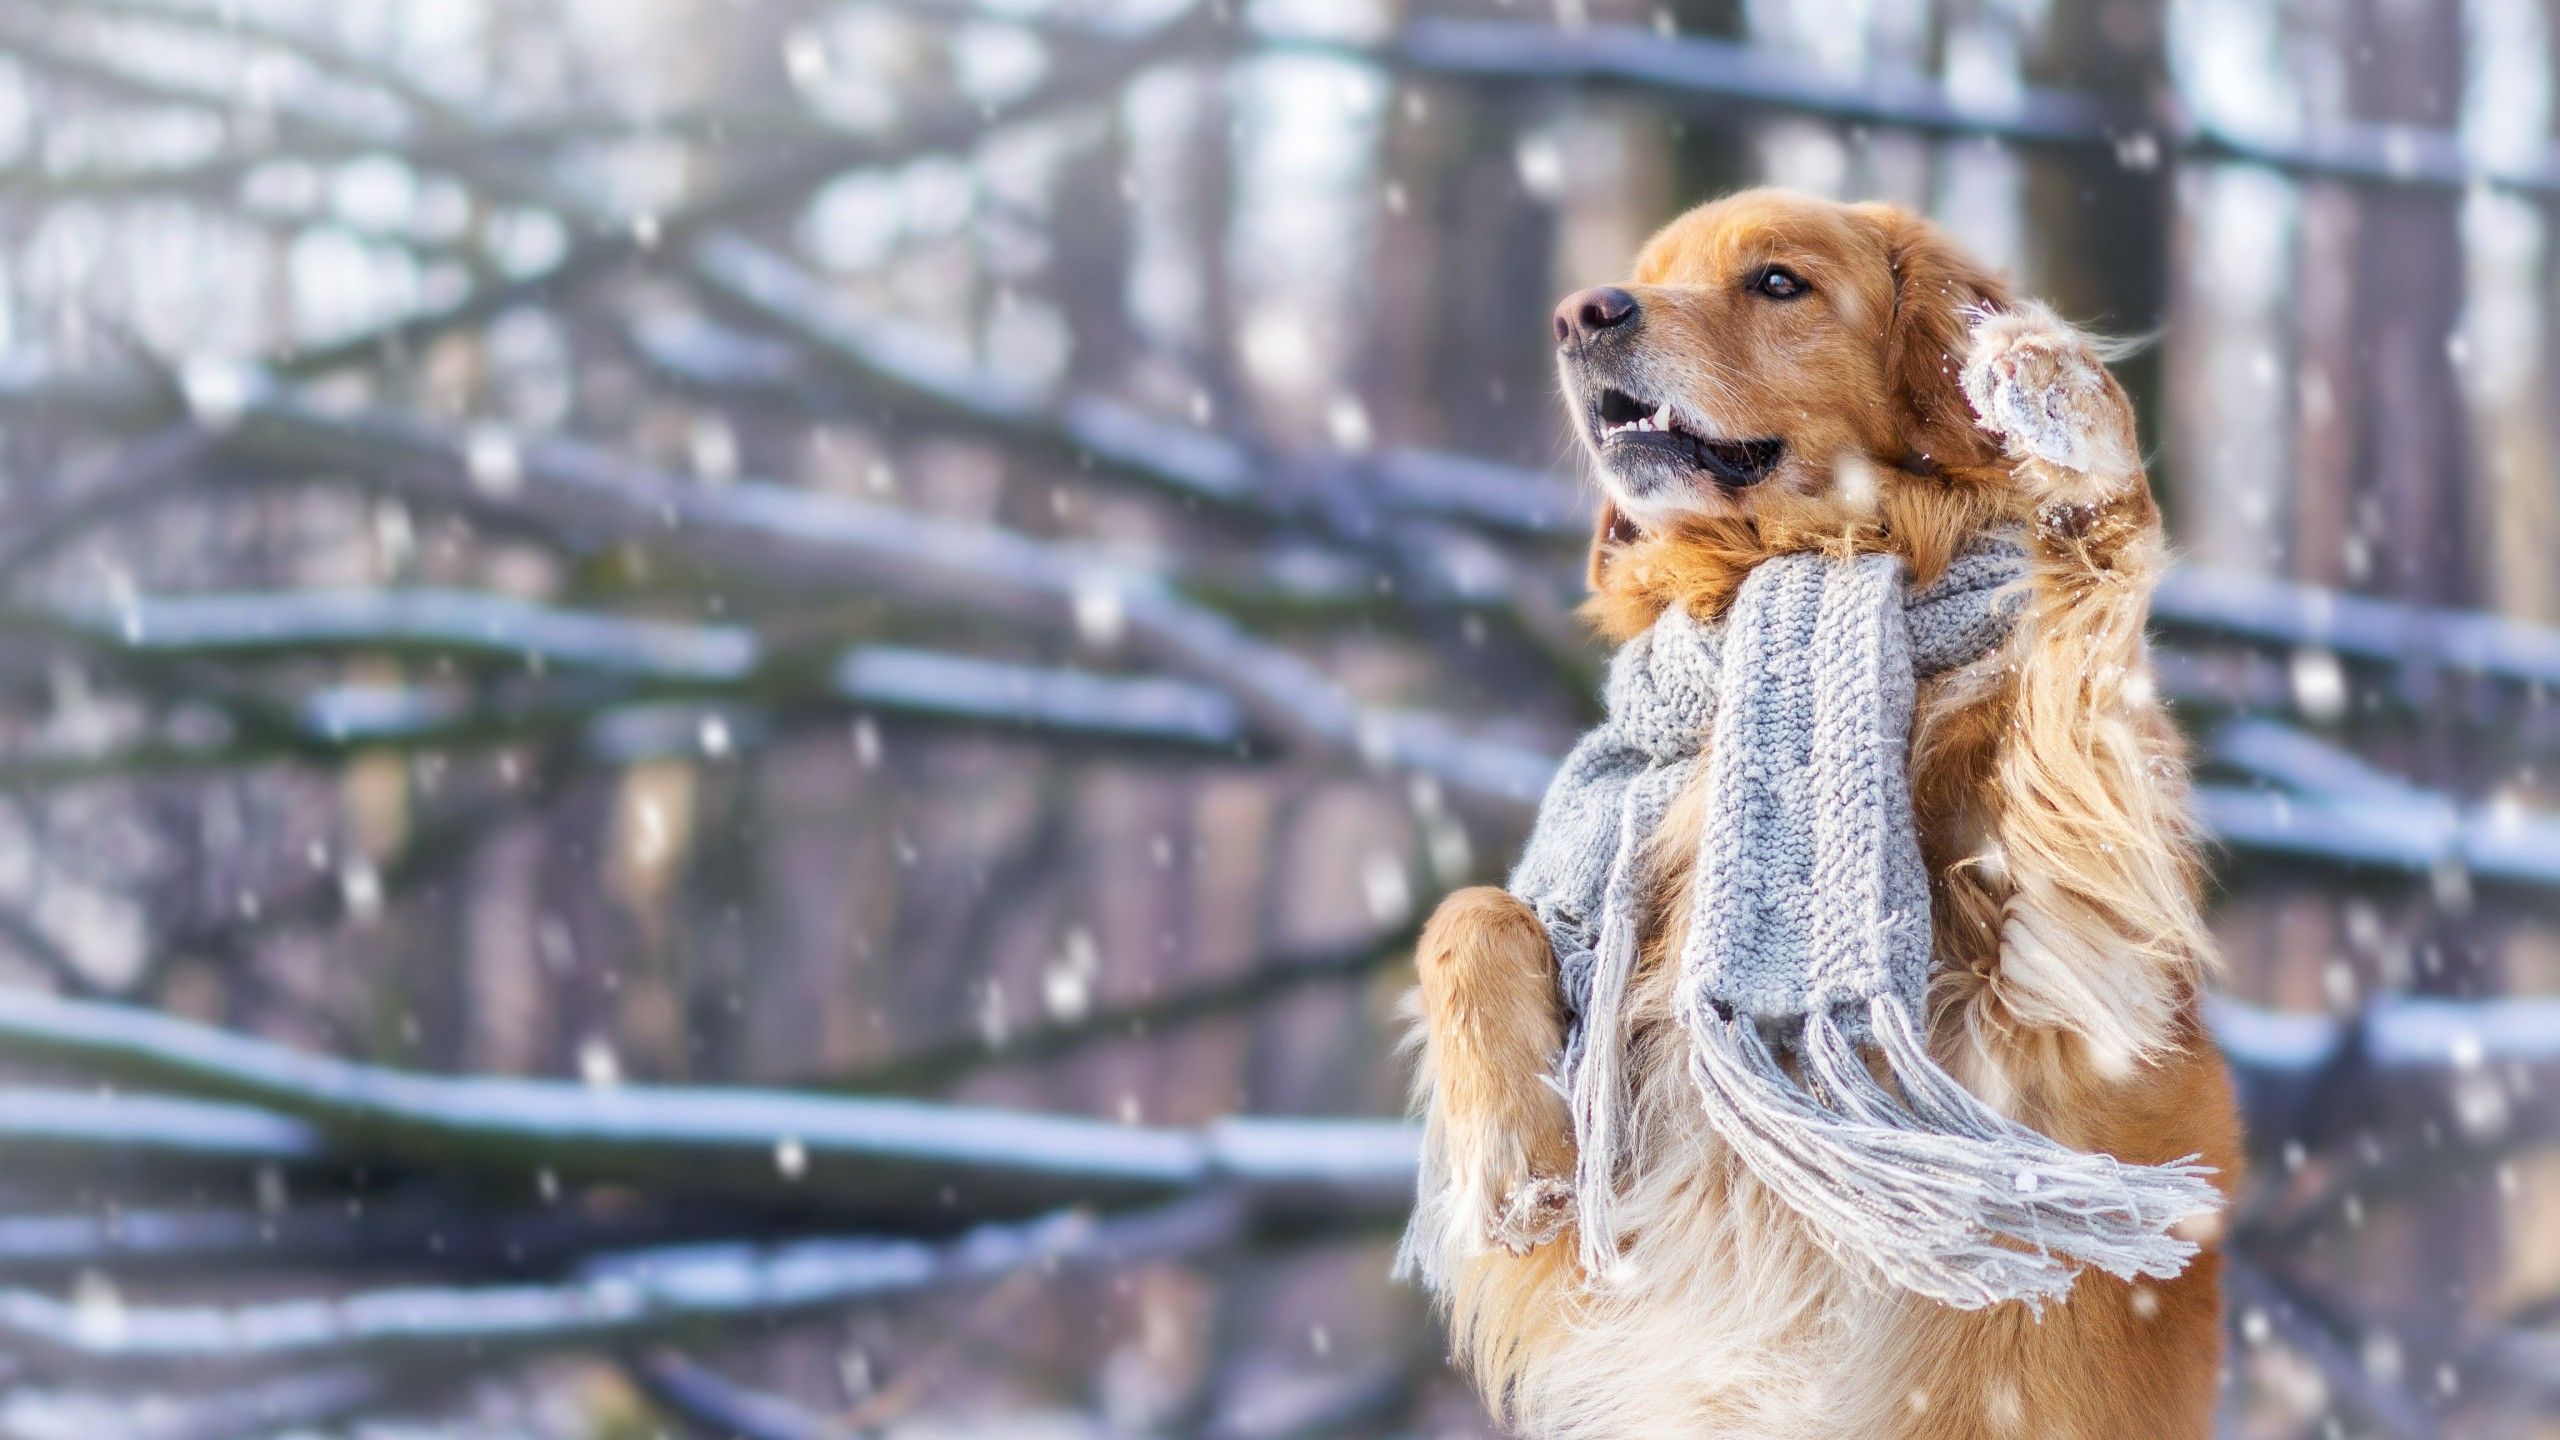 Cute Winter Puppy Wallpapers Wallpapers